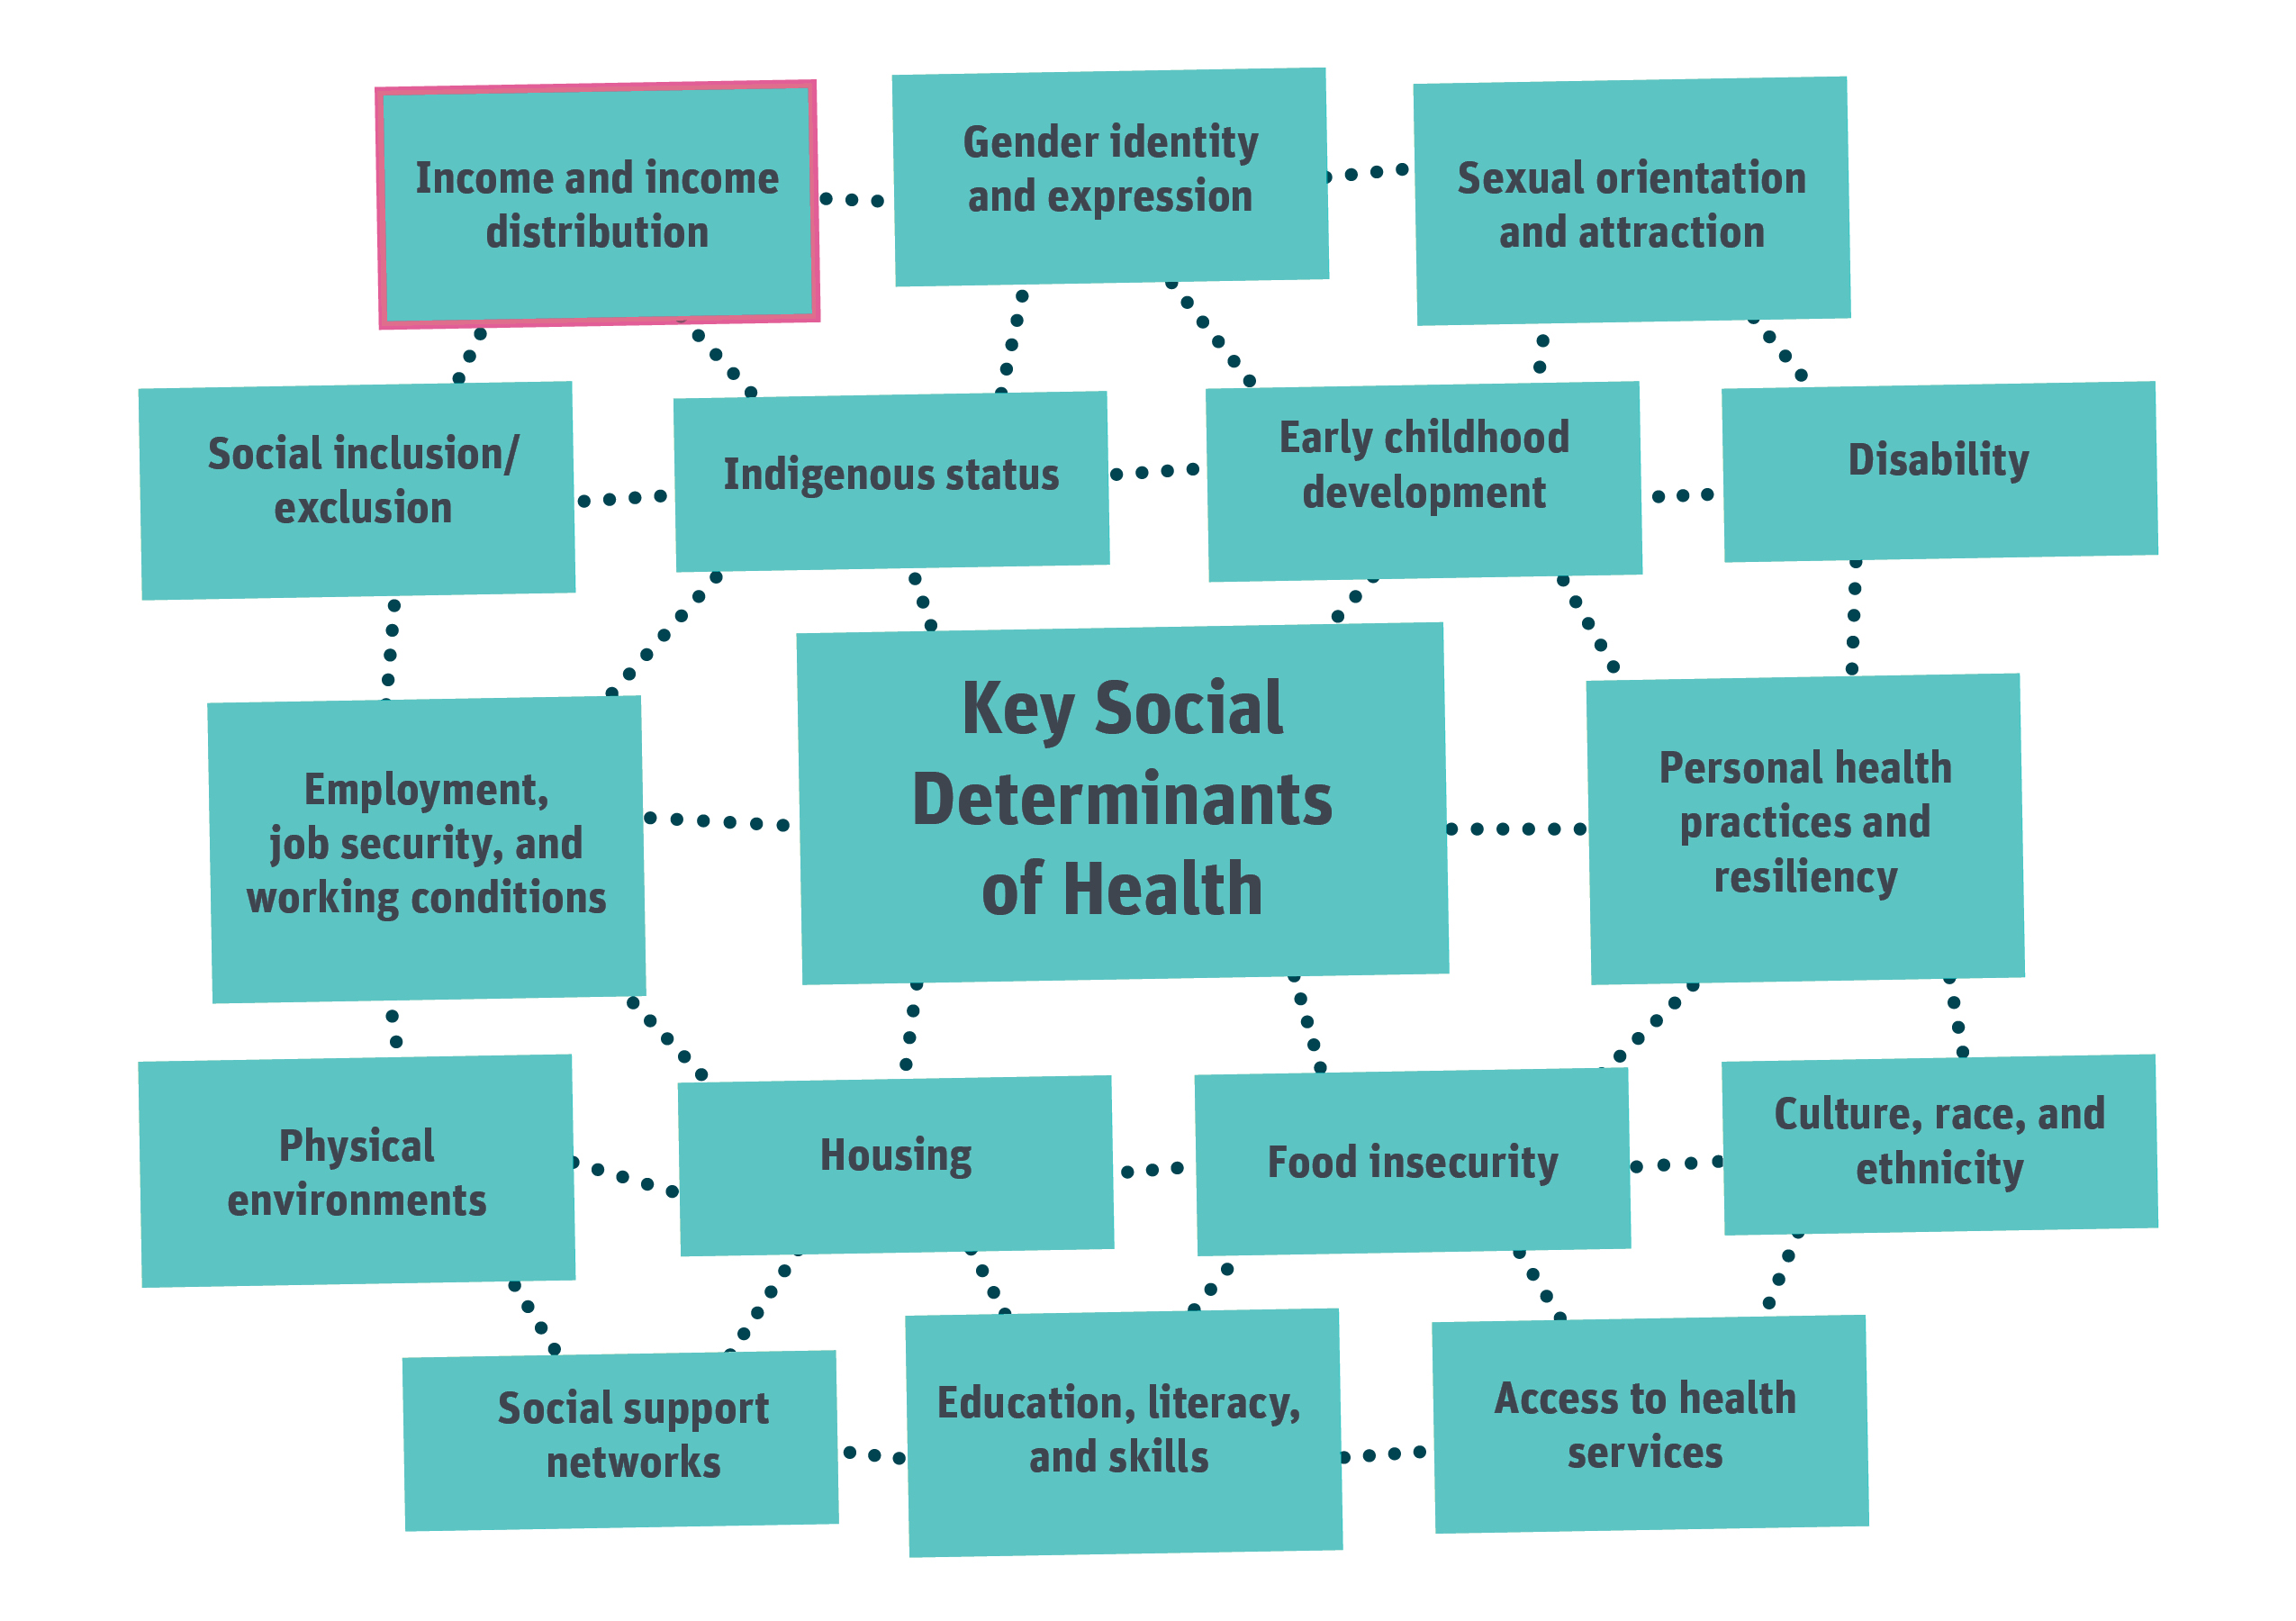 Figure 1 shows the interconnectedness of the social determinants of health. Income and Income Distribution are highlighted as the focus of this report. The key social determinants of health depicted are listed below.